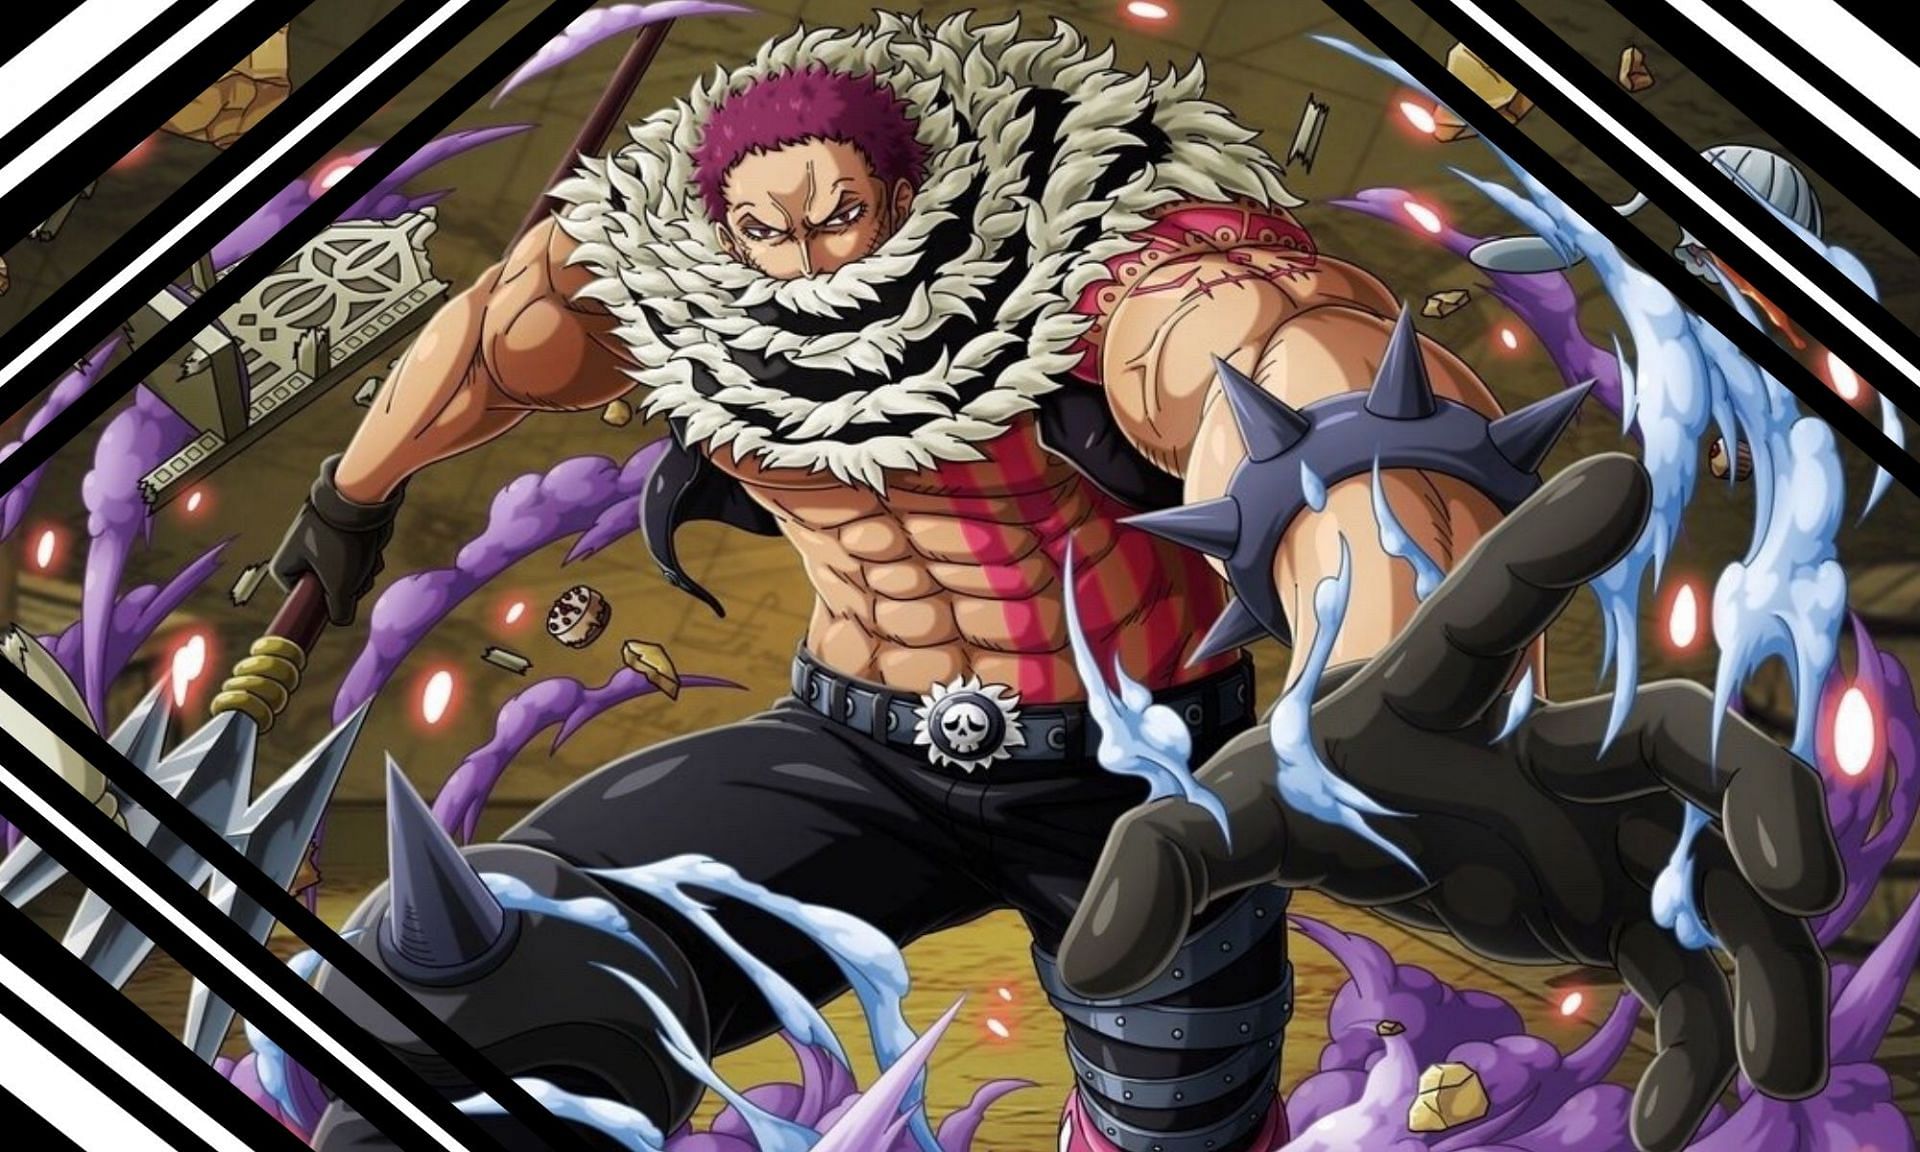 10 Anime Characters Who Could Defeat One Piece's Katakuri